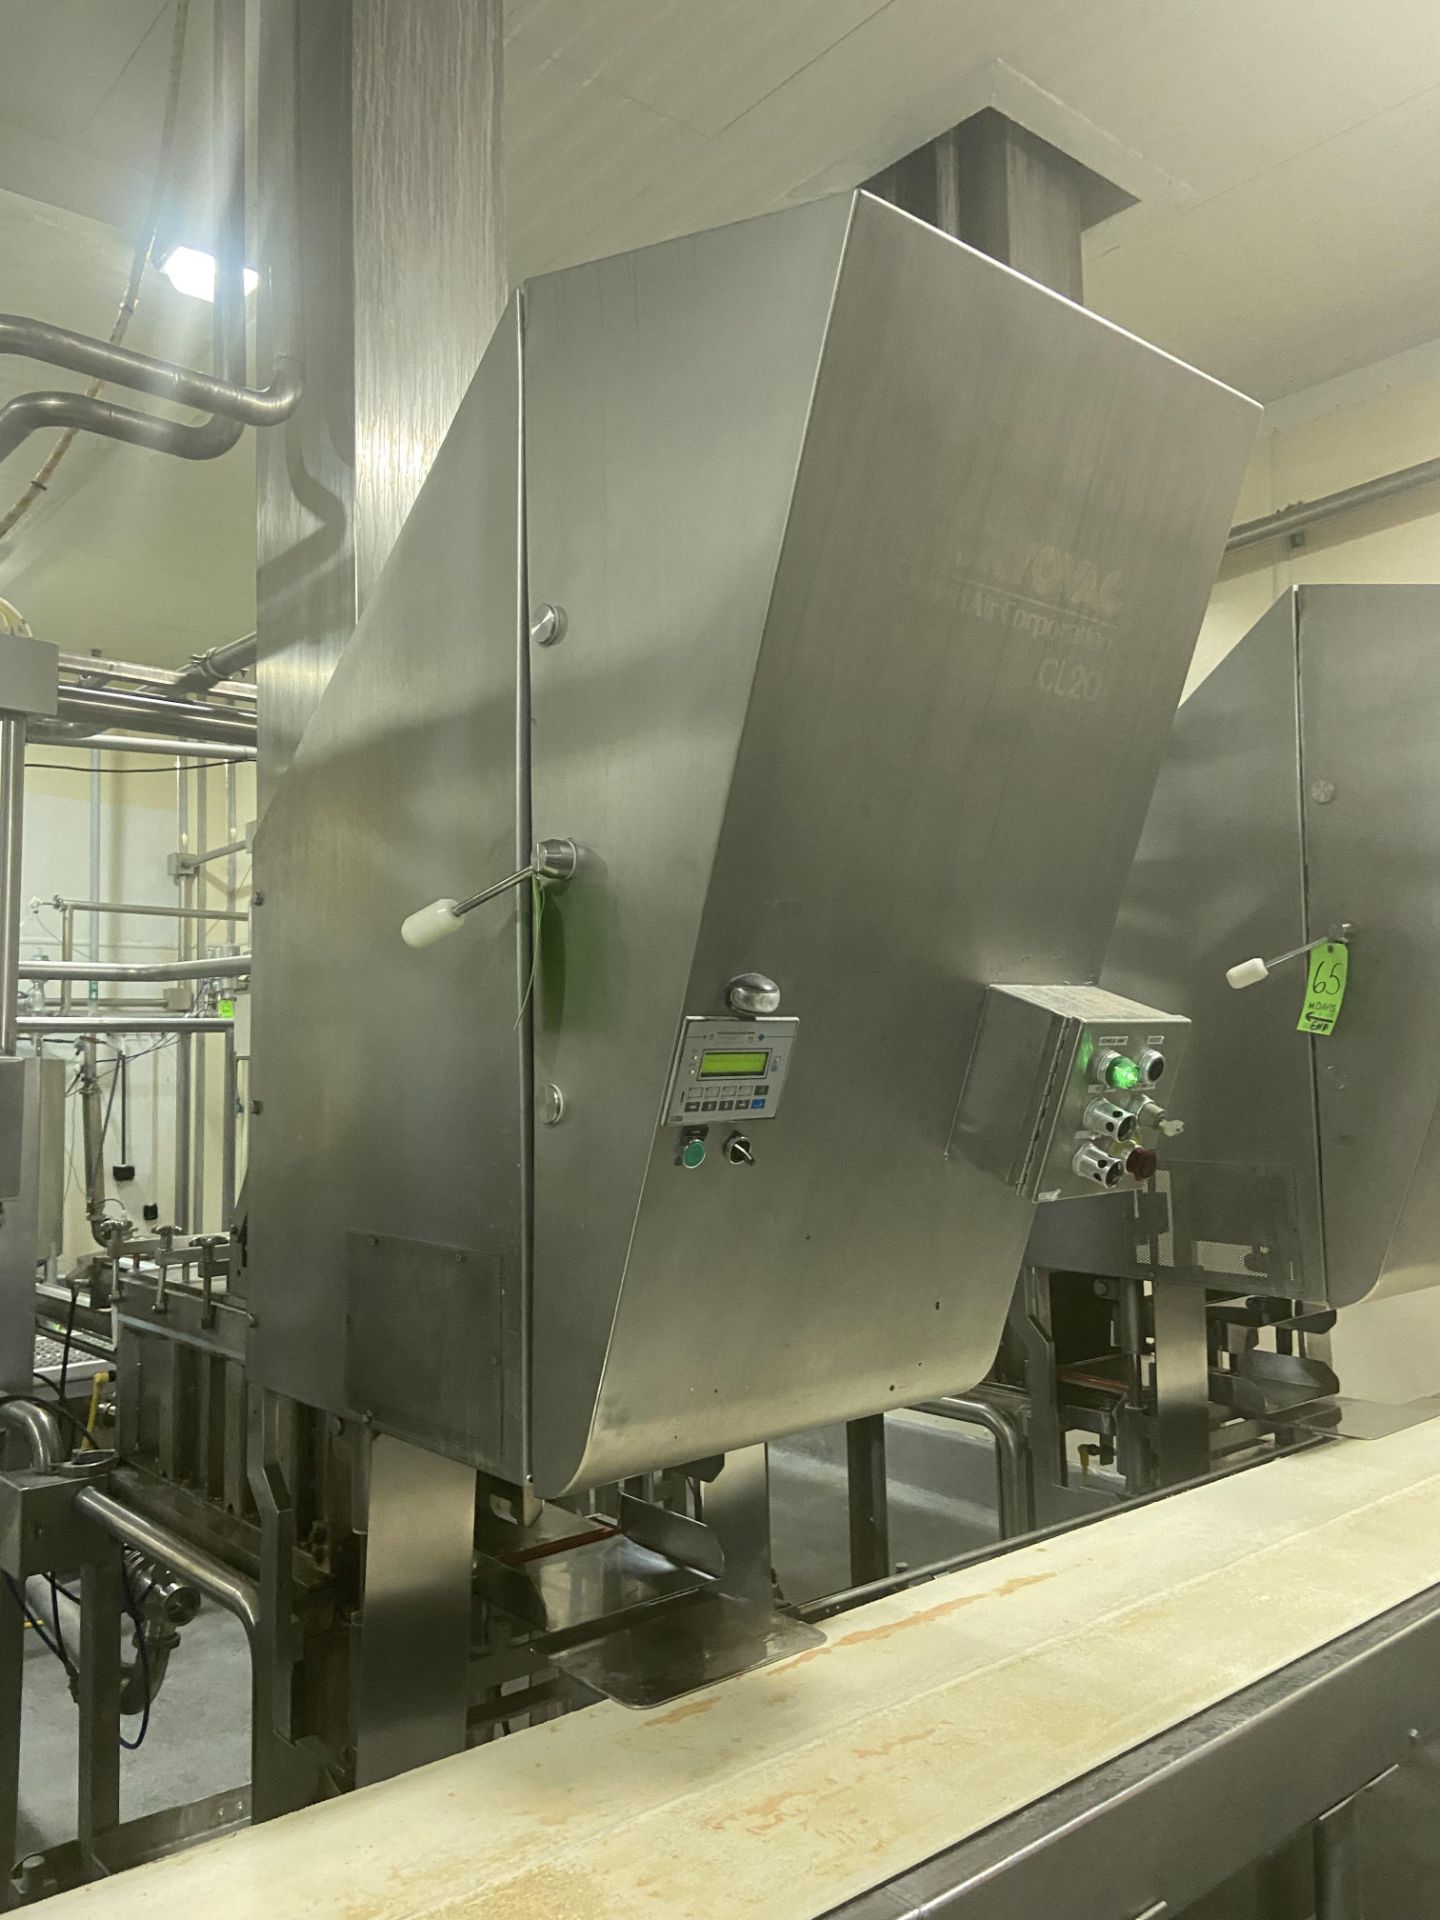 Stoelting (Relco)S/S Cheese Blocker with Cyrovac CL20 Bagger, M/N C120, S/N 01104, with - Image 2 of 12